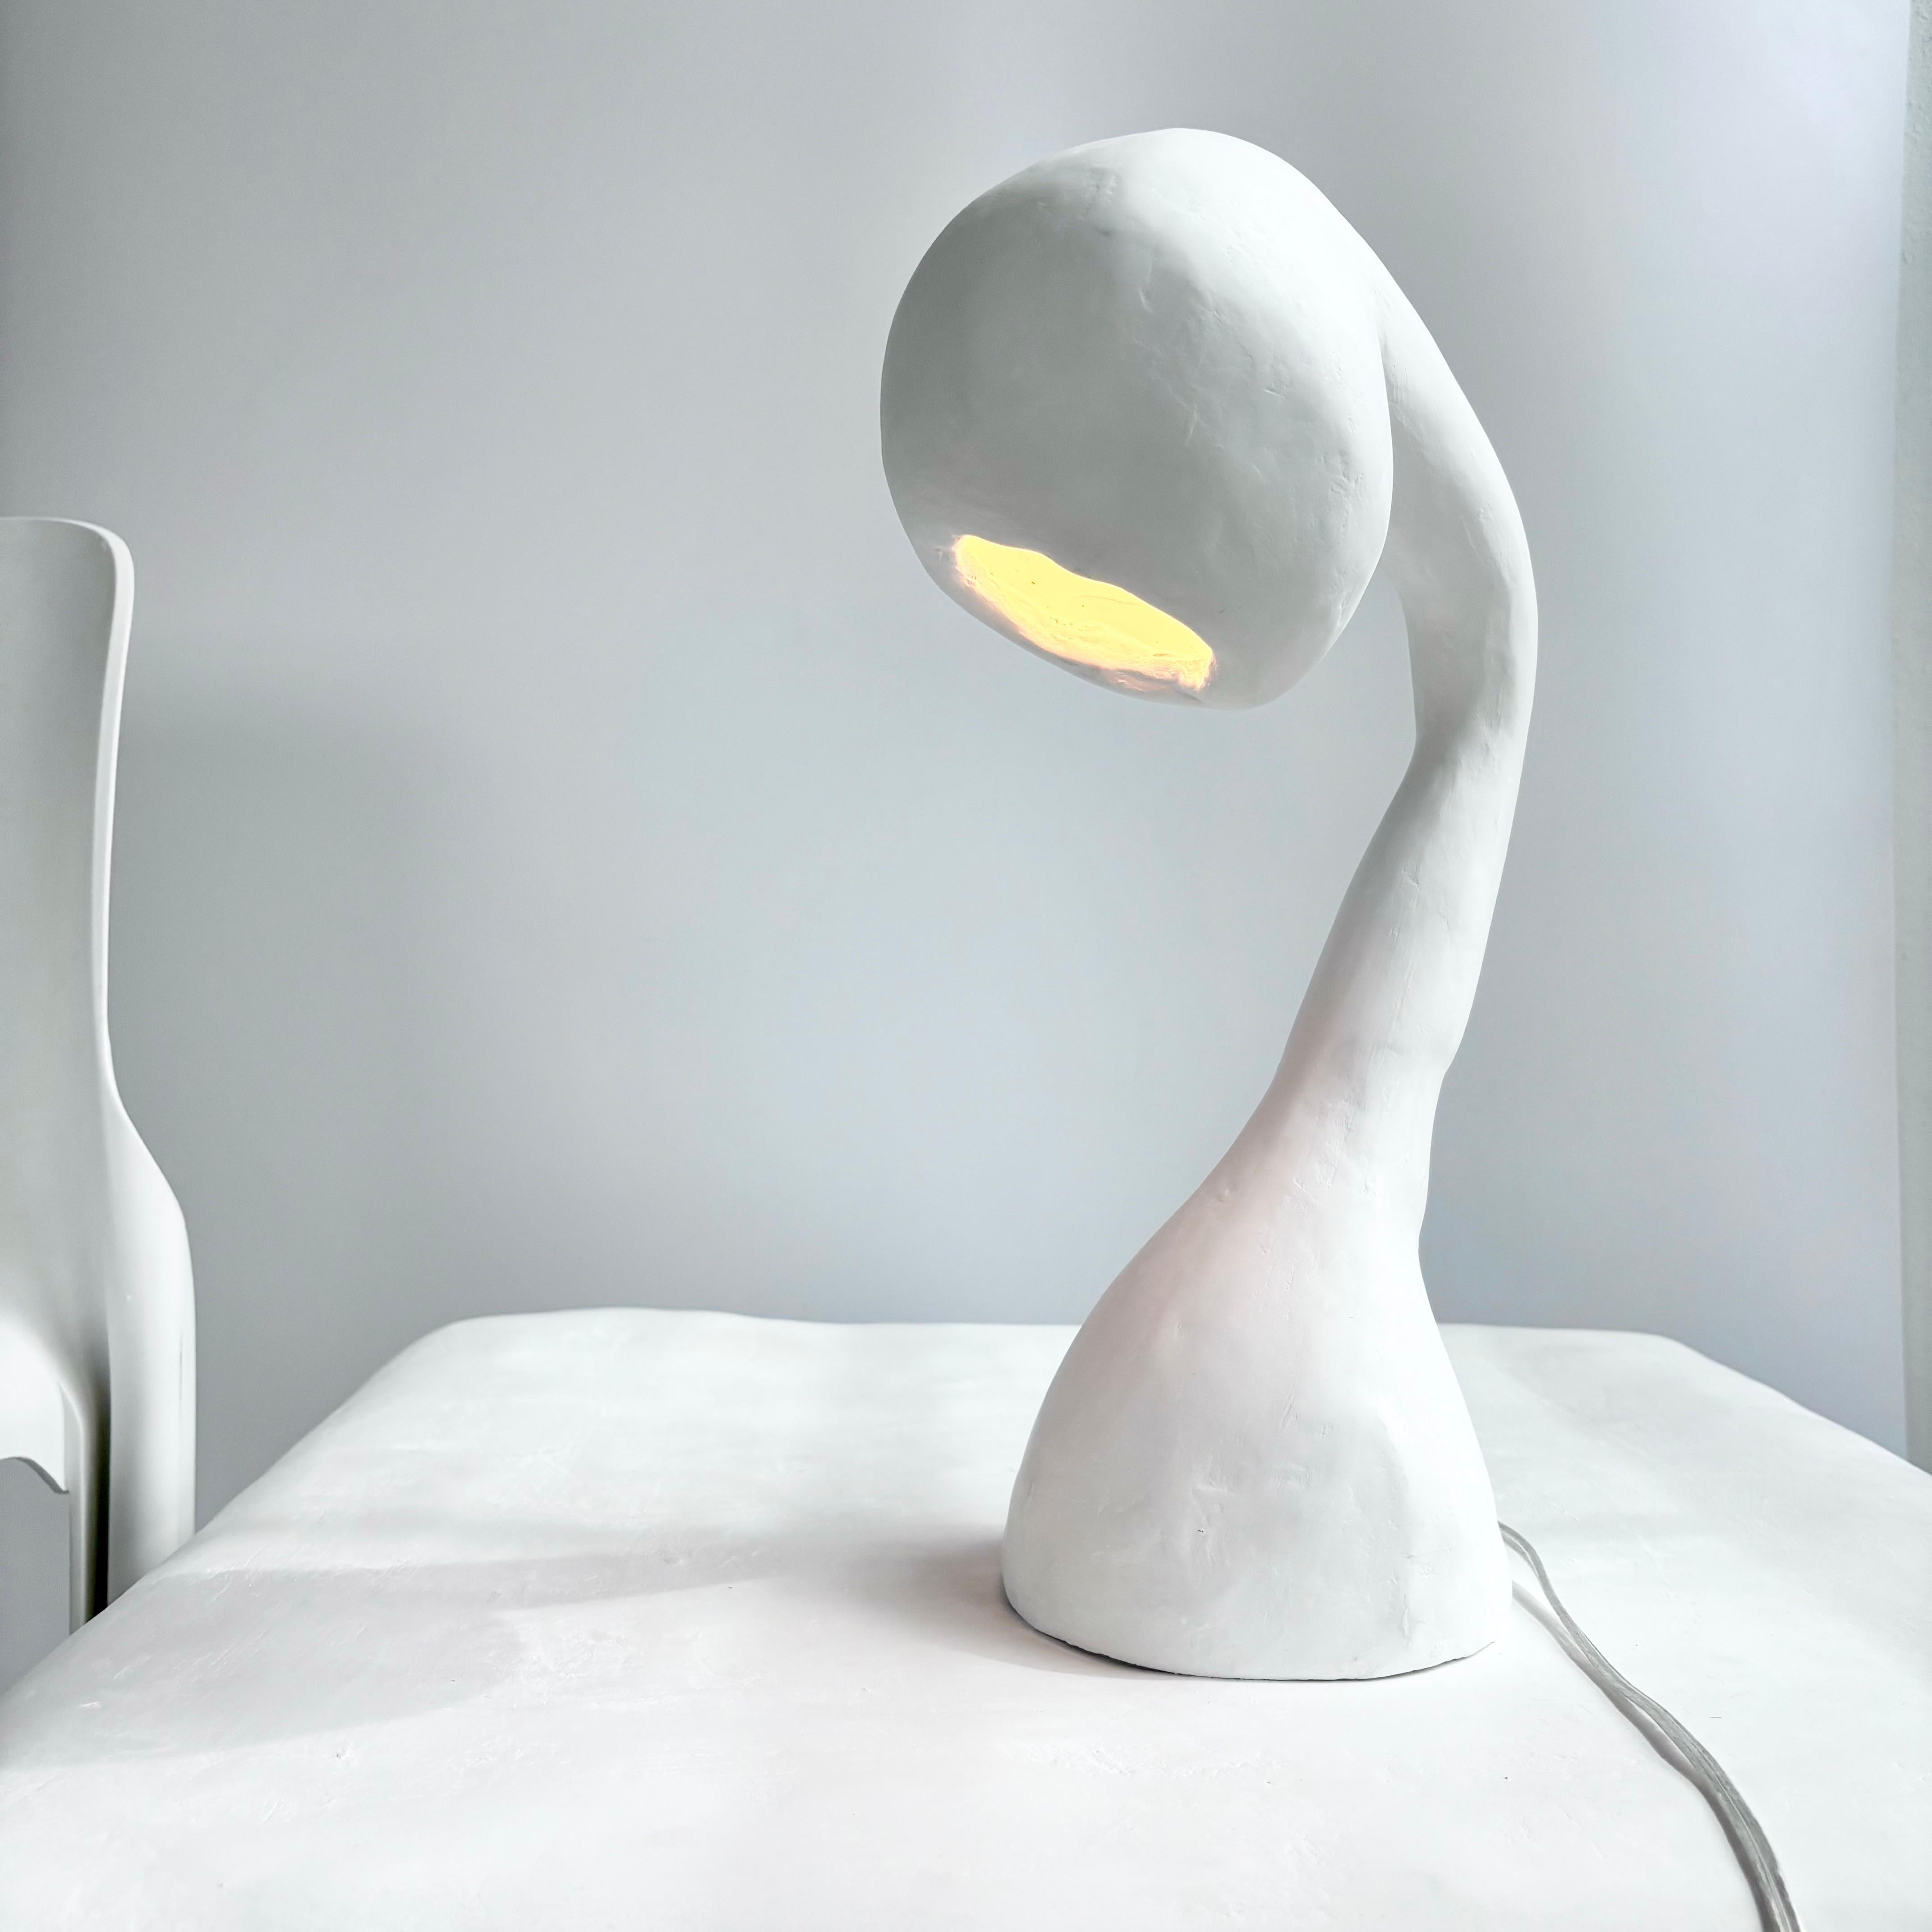 American Biomorphic Line by Studio Chora, Task Table Lamp, White Lime Plaster, In Stock